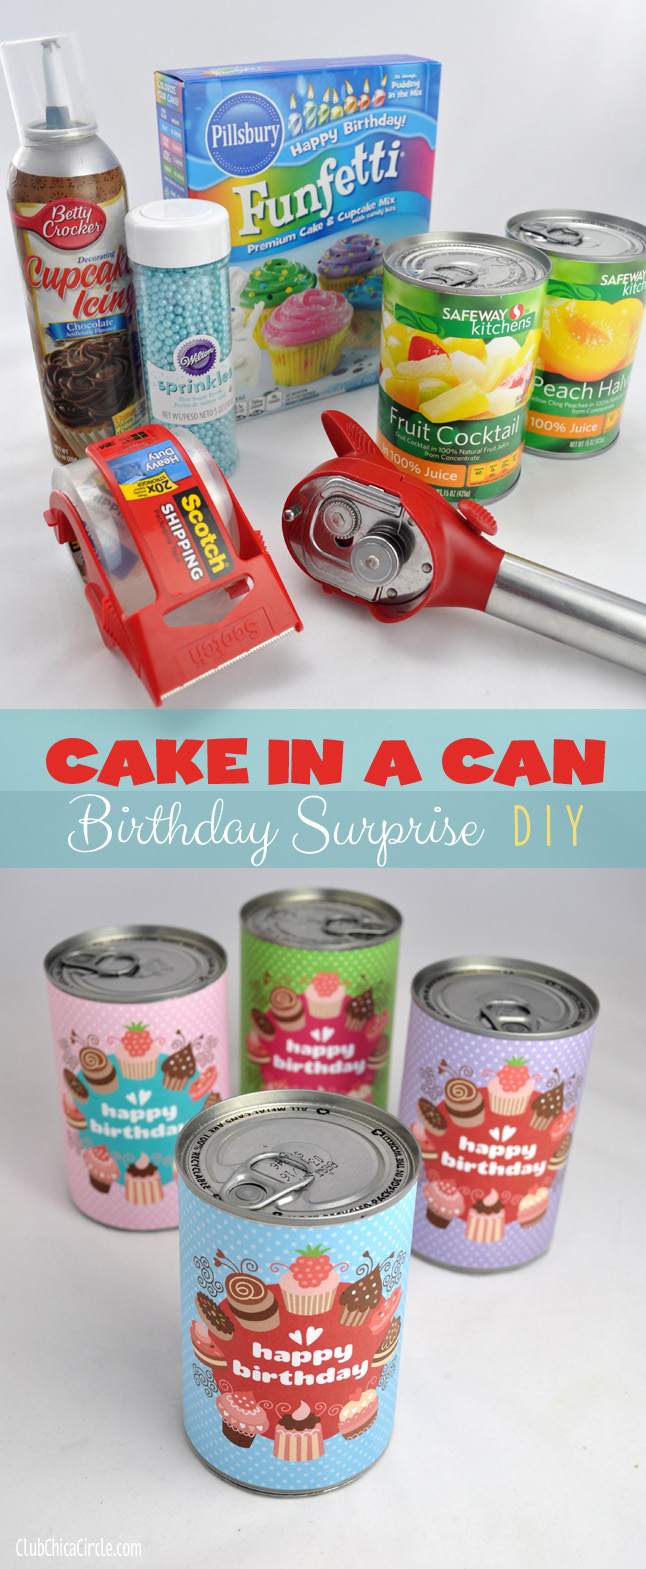 Cake in a Can Birthday Surprise Tutorial... What an awesome idea! 